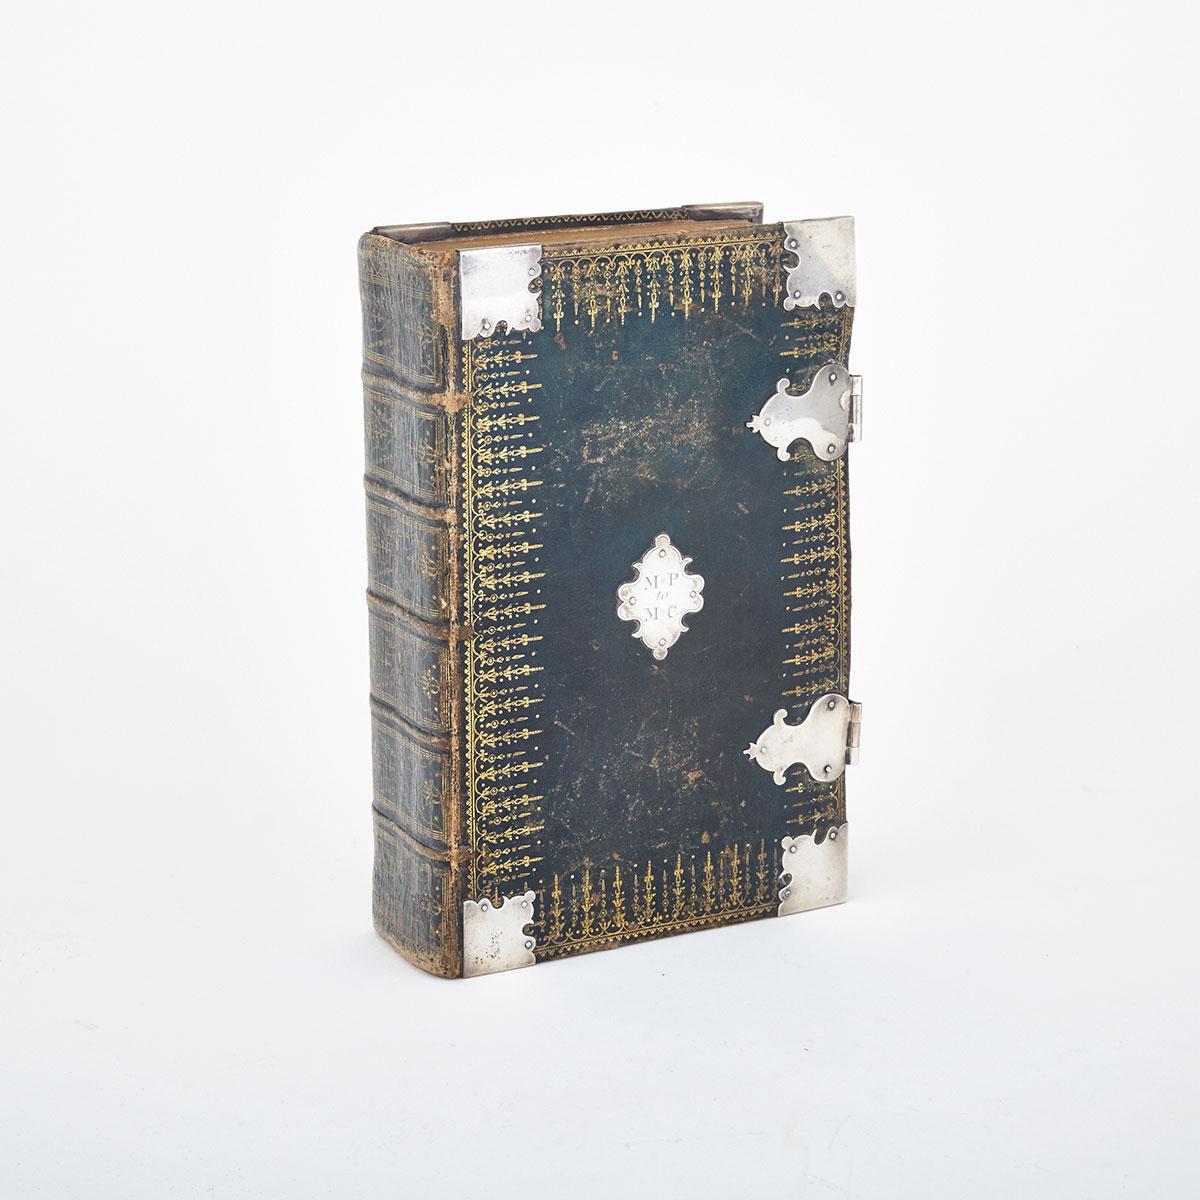 George II Silver Mounted BOOK OF COMMON PRAYER, AND ADMINISTRATION OF THE SACRAMENTS, AND OTHER RITES AND CEREMONIES OF THE CHURCH, ACCORDING TO THE USE OF THE CHURCH OF ENGLAND; TOGETHER WITH THE PSALTER OR PSALMS OF DAVID, POINTED AS THEY ARE TO BE SUNG OR SAID IN CHURCHES, LONDON, 1759